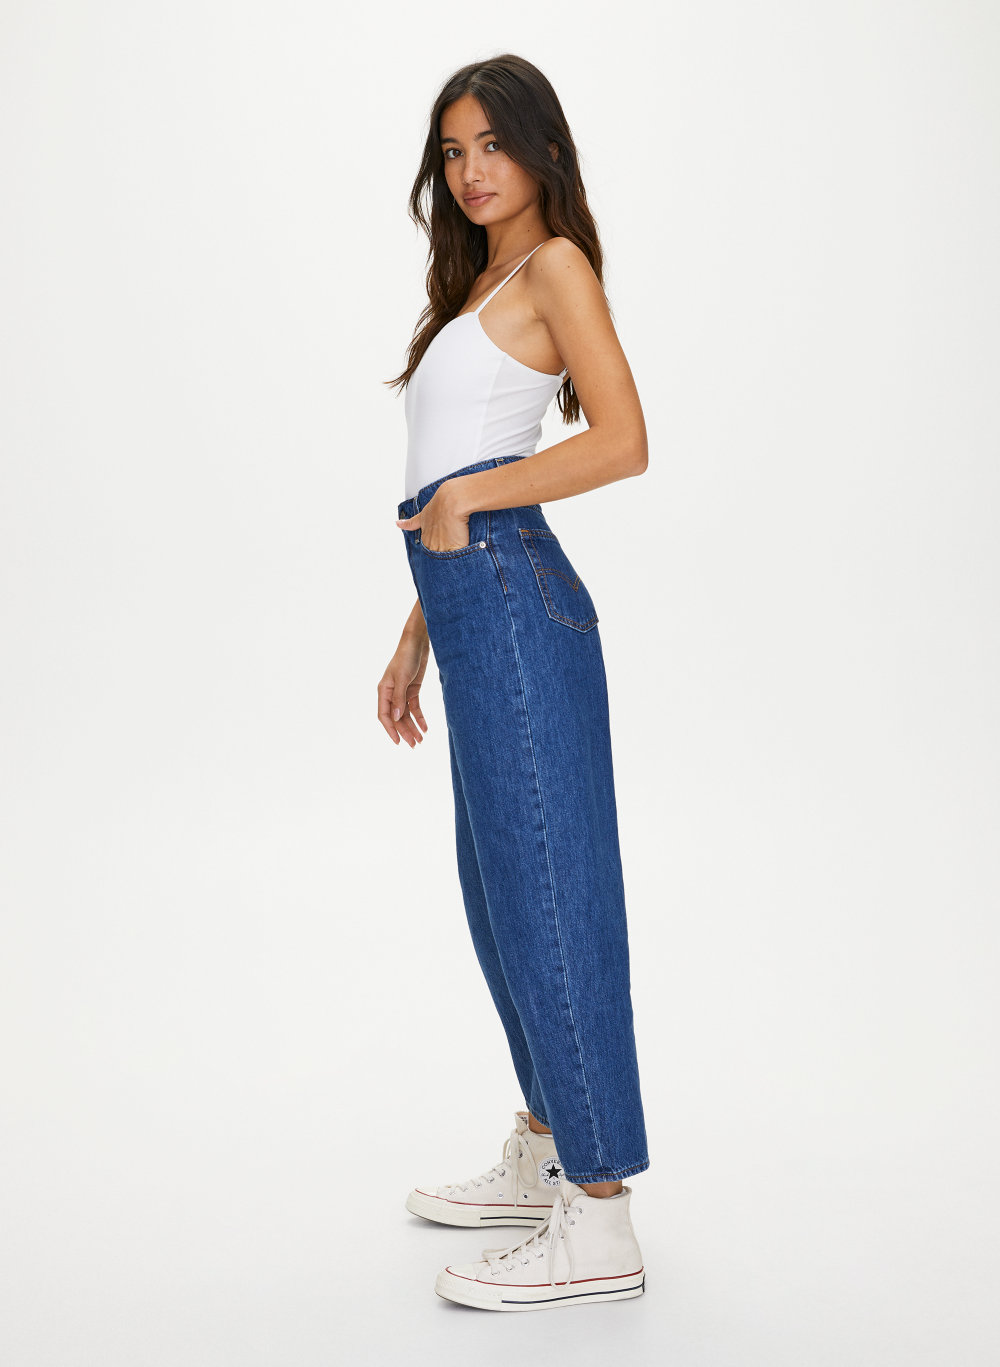 balloon jeans for ladies